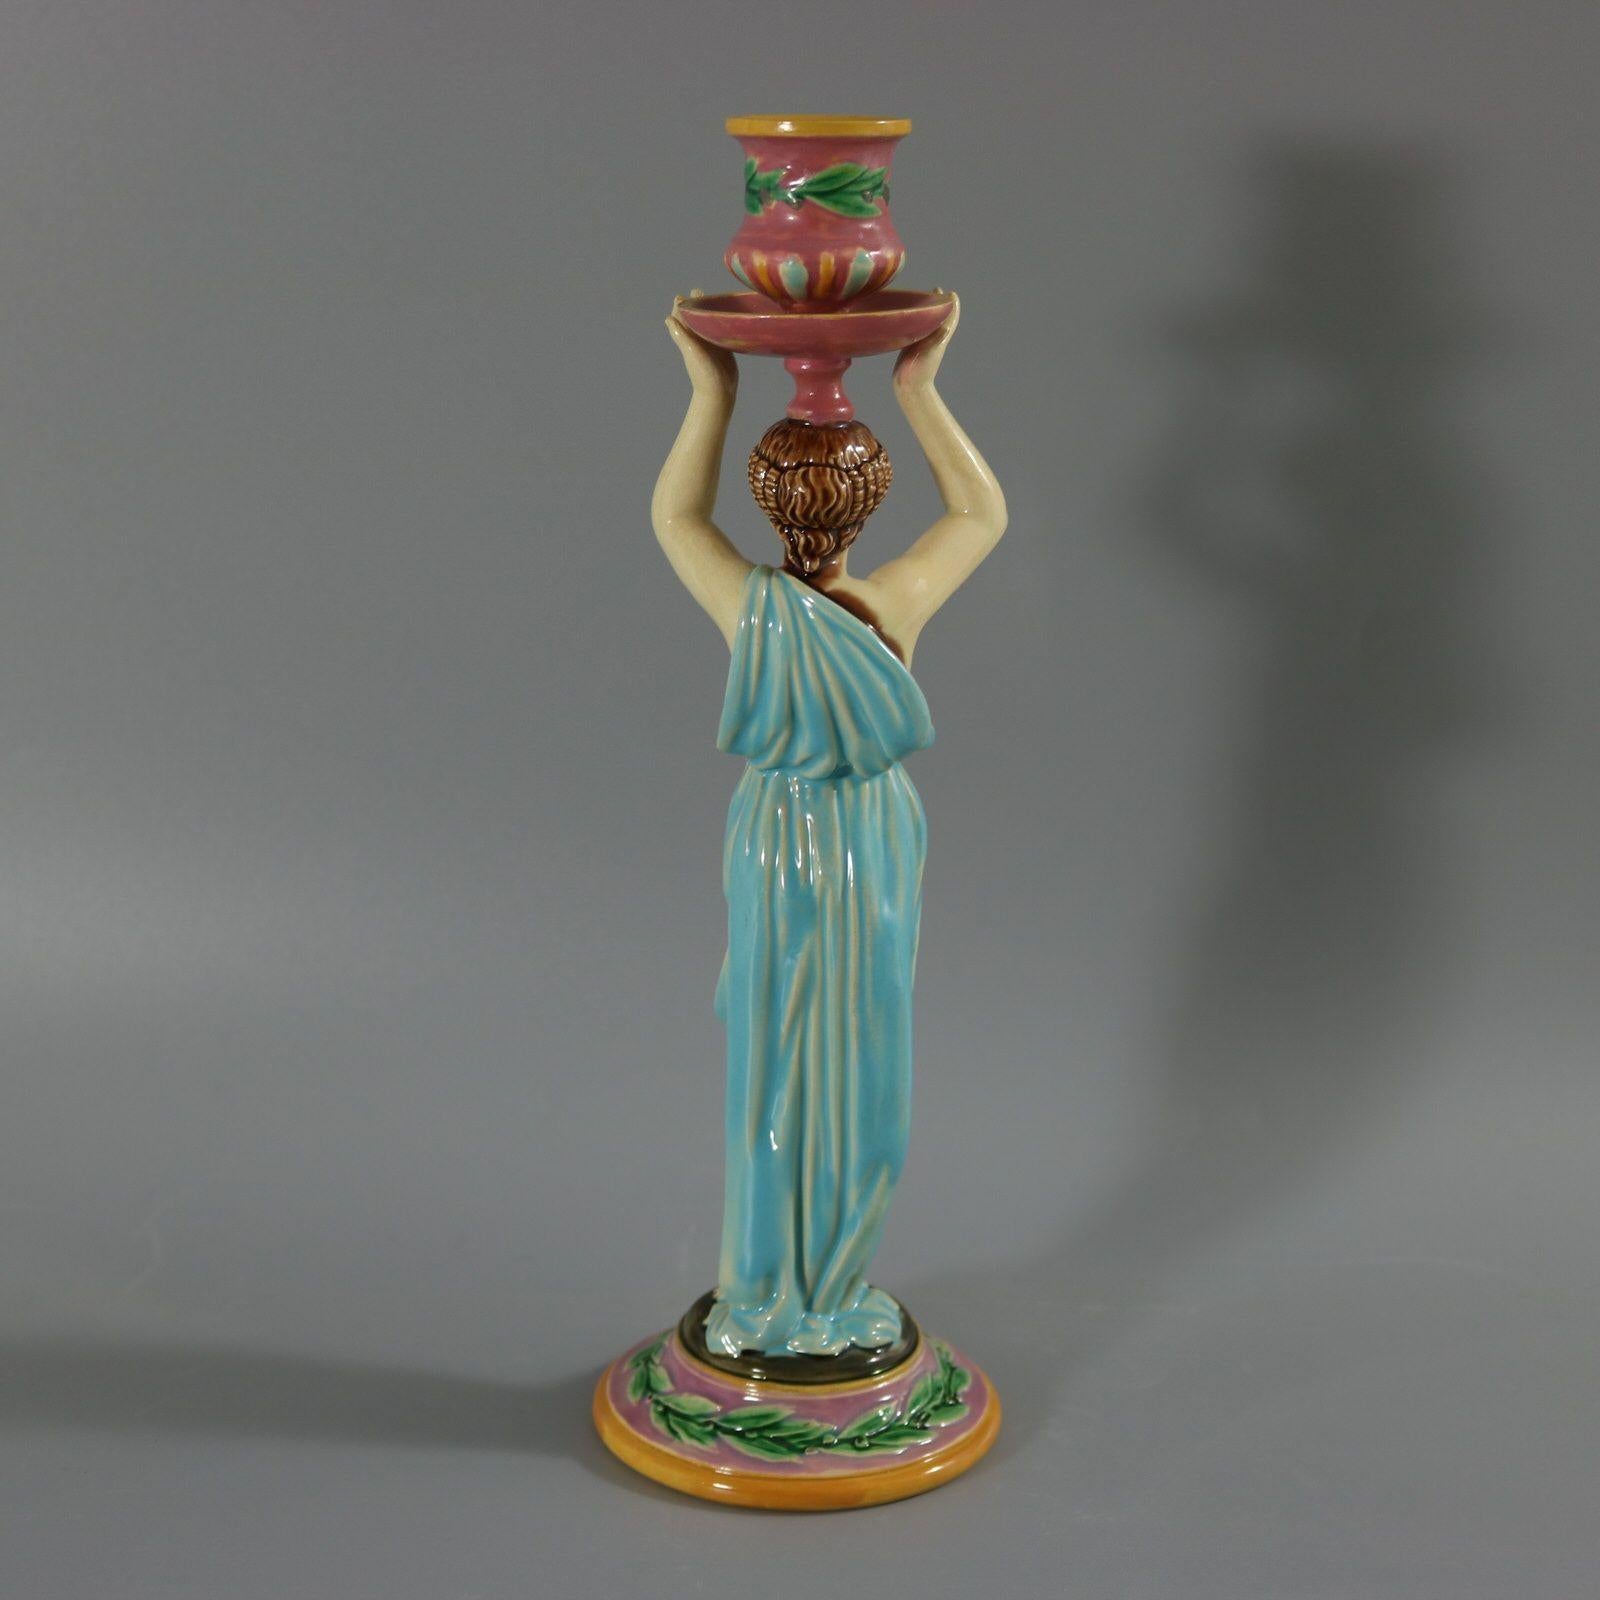 George Jones Majolica Egyptian Figural Candlestick In Good Condition For Sale In Chelmsford, Essex